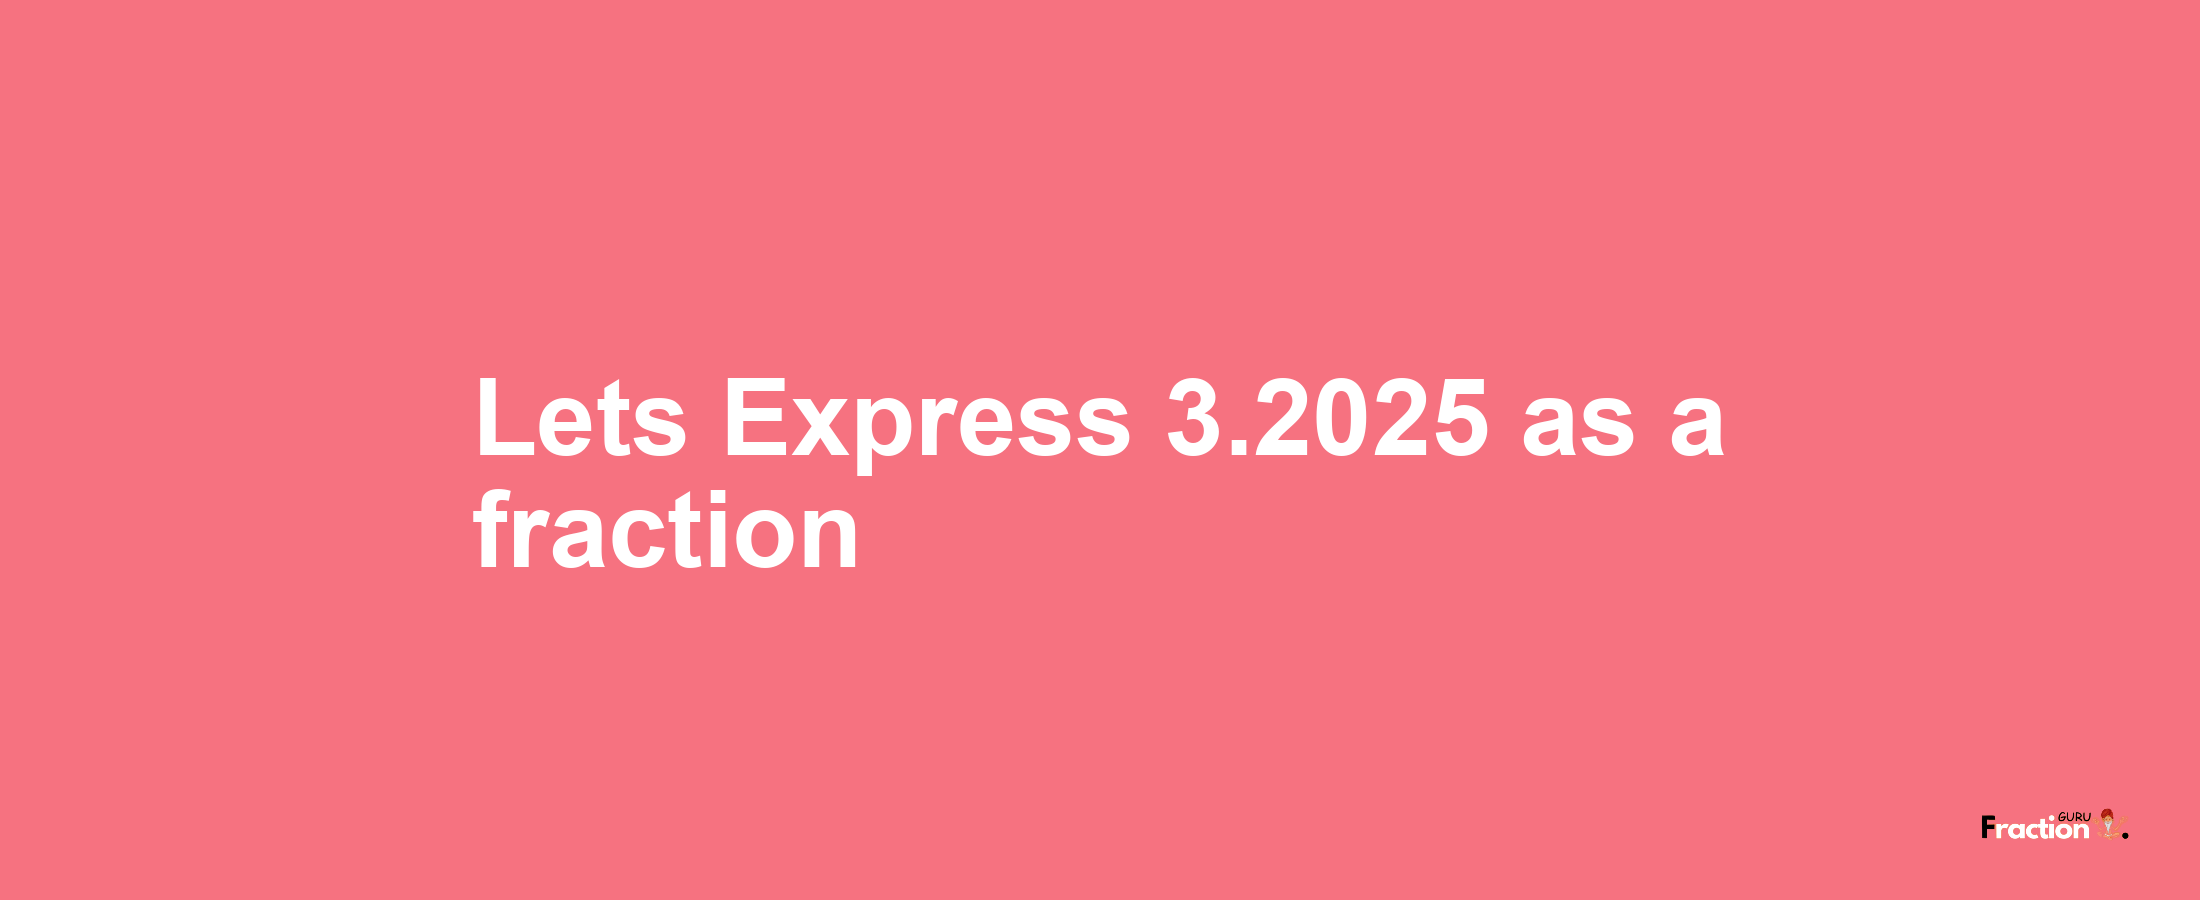 Lets Express 3.2025 as afraction